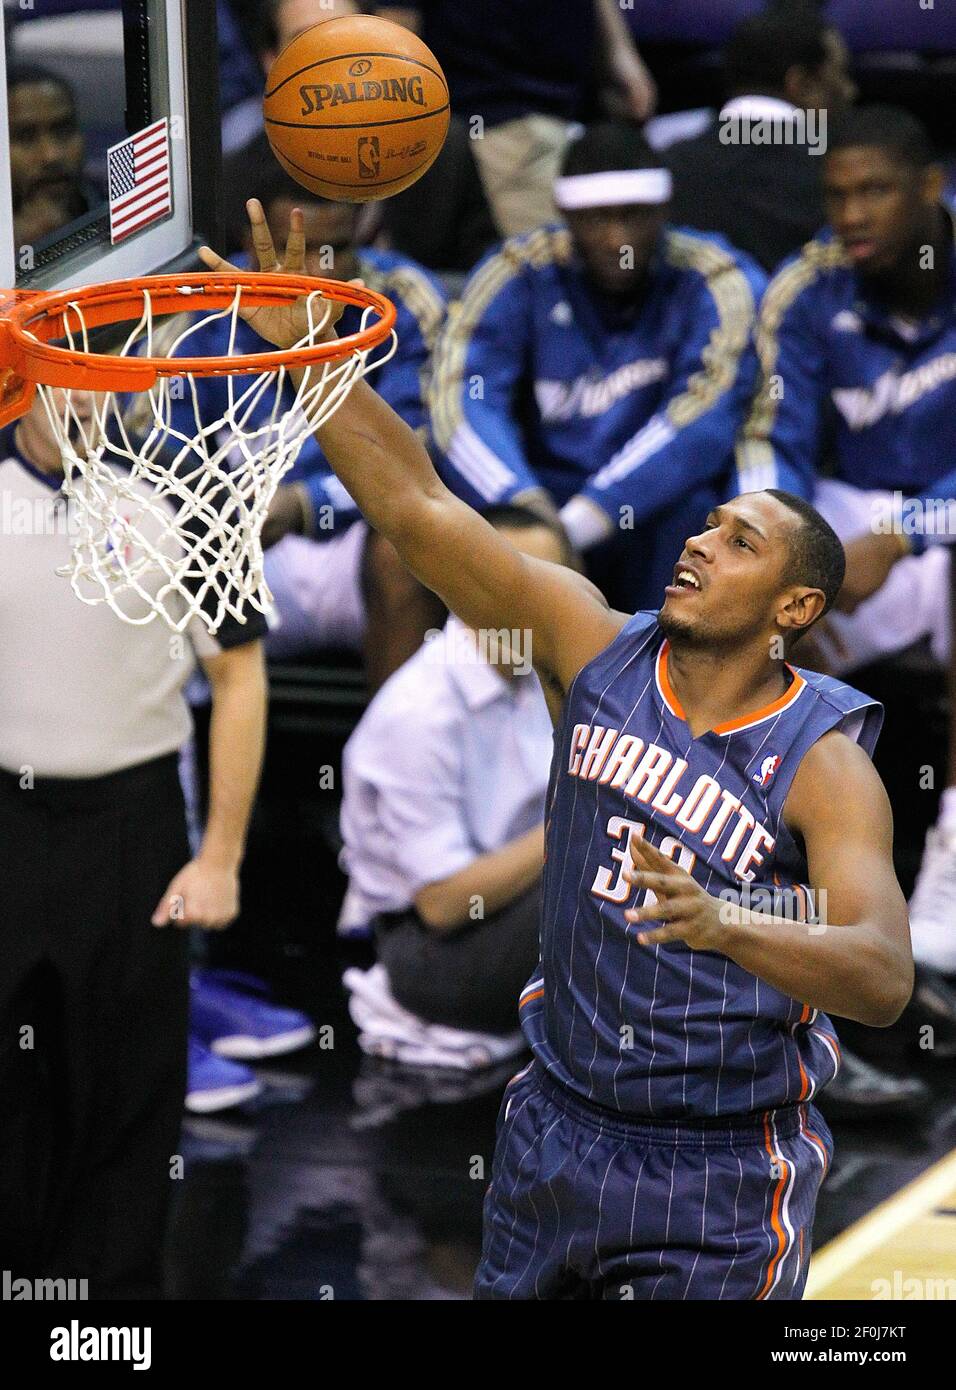 Charlotte Bobcats power forward Boris Diaw (32) scores against the Washington Wizards during their game played at the Verizon Center in Washington, D.C., Monday, December 20, 2010. Washington defeated Charlotte 108-75 (Harry E. Walker/MCT/Sipa USA) Stock Photo